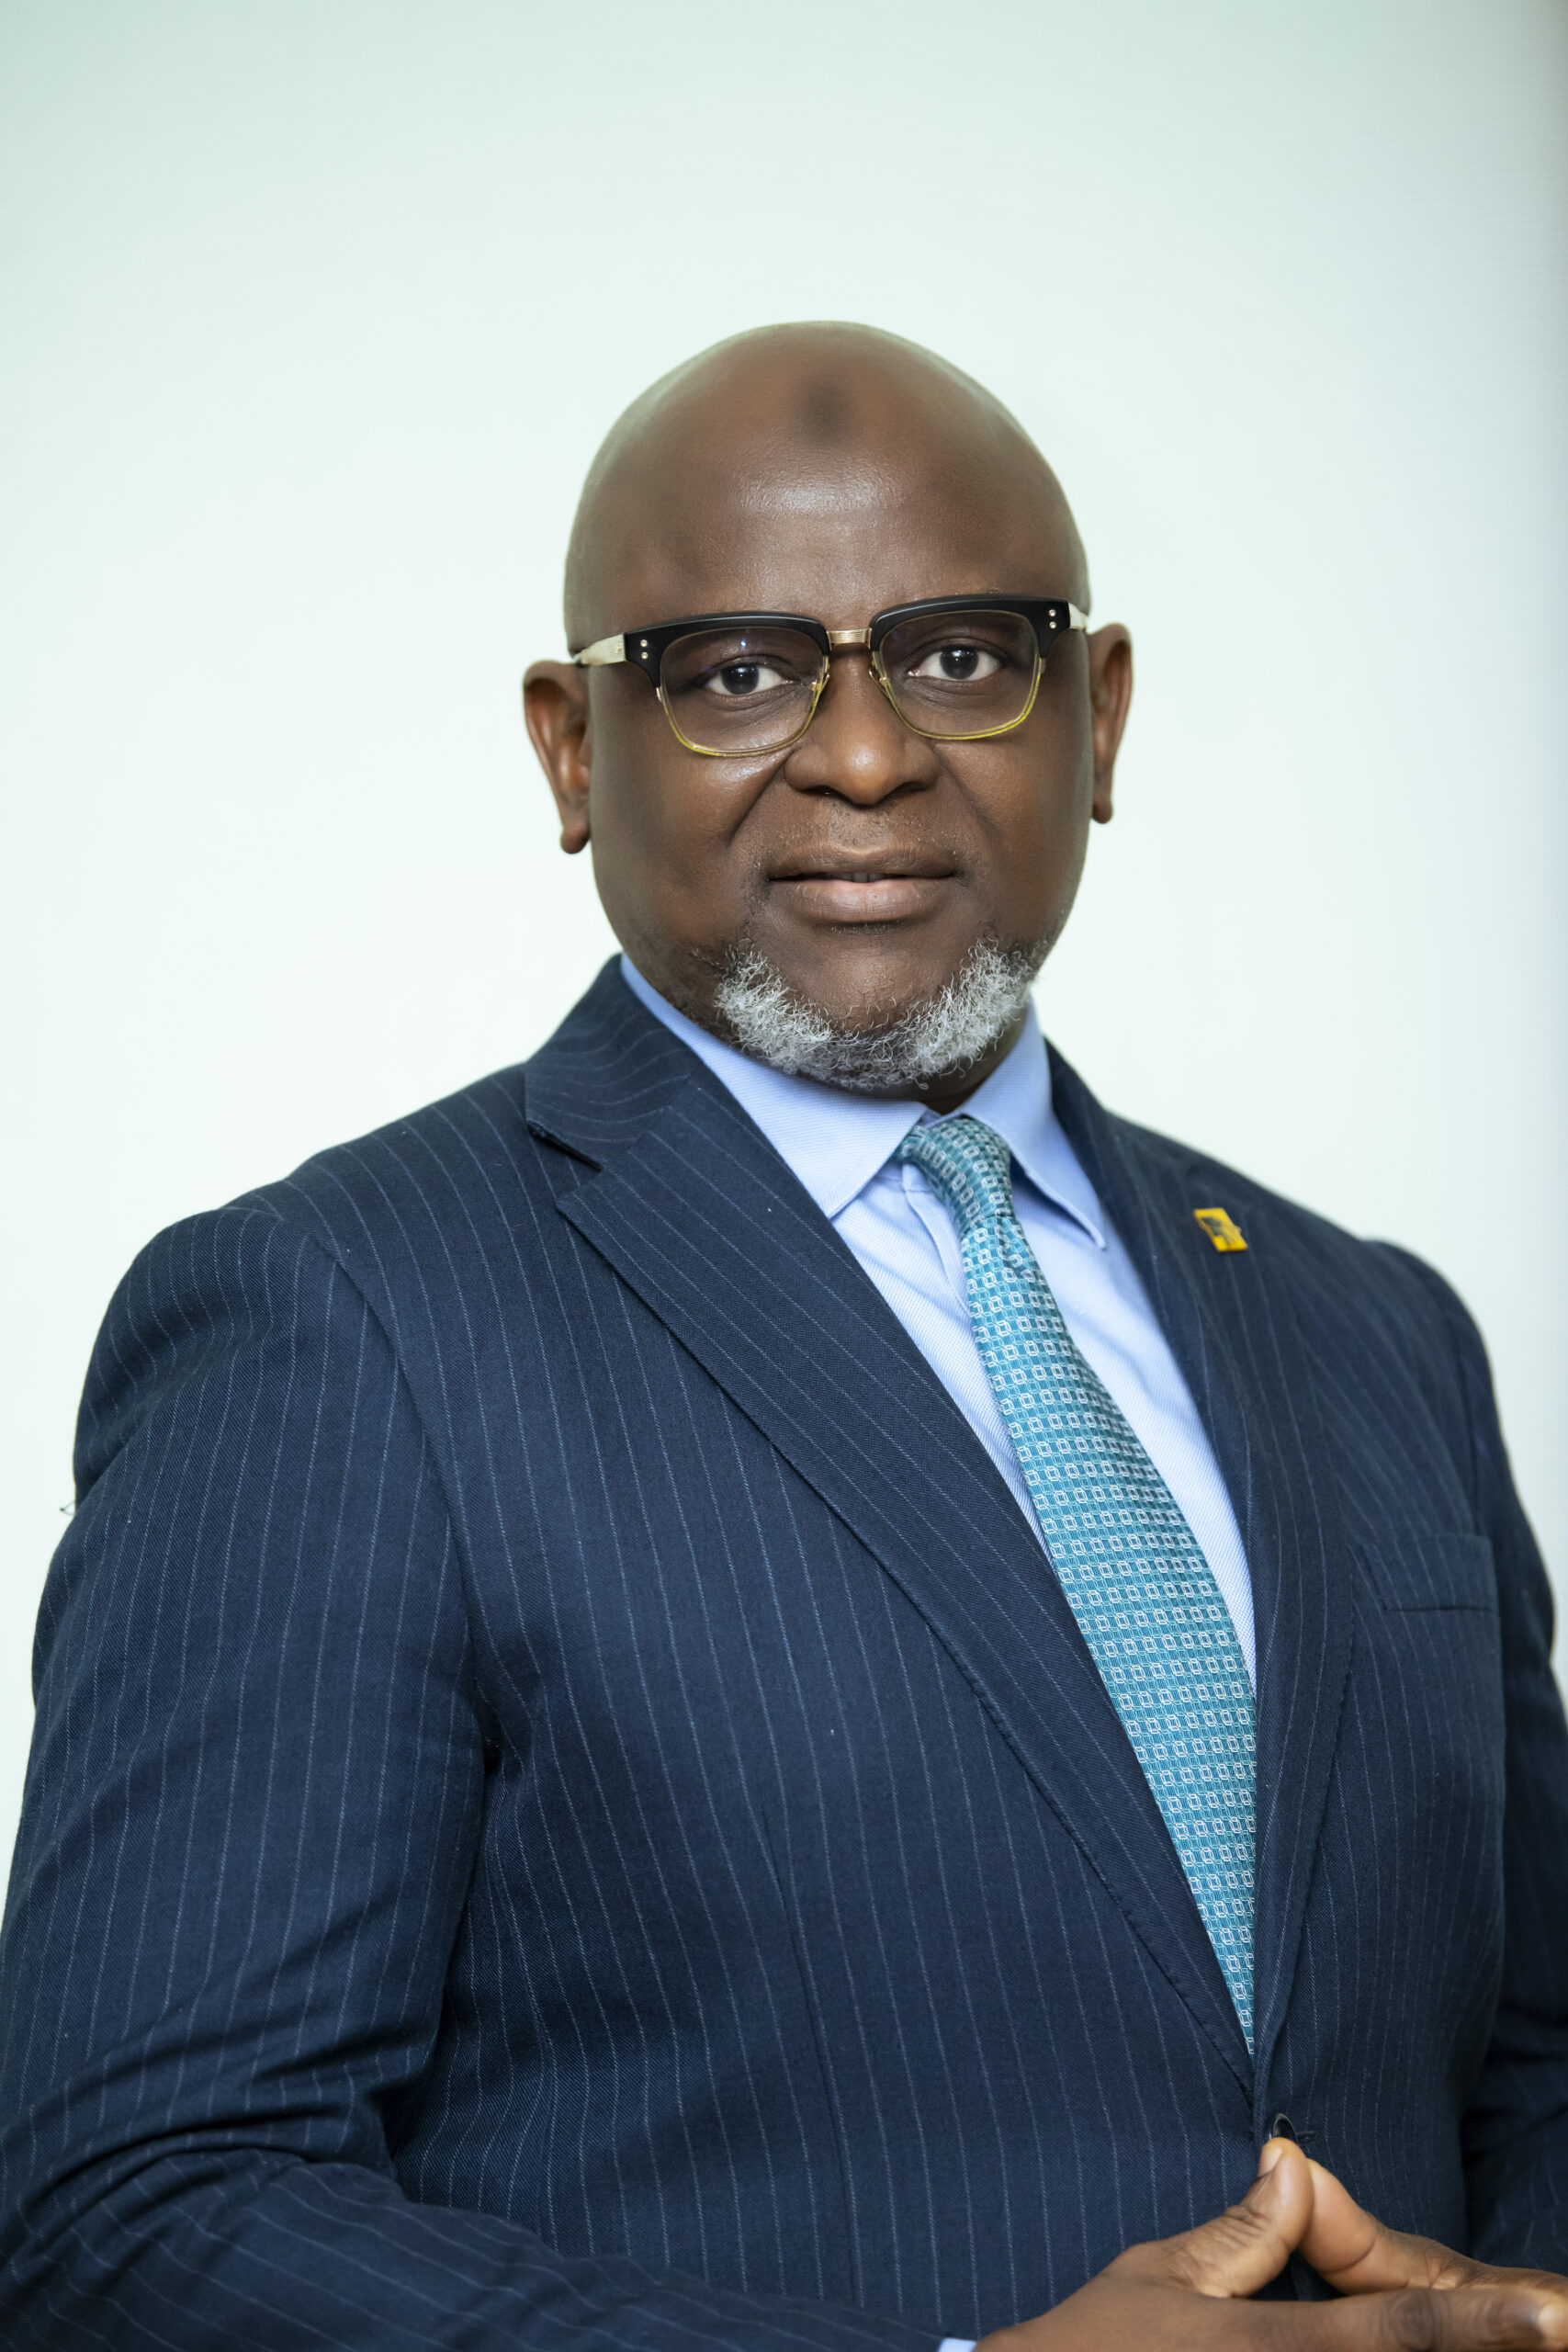 ADEDUNTAN: FIRSTBANK IS RESILIENT, STABLE AND BUILT FOR THE LONG HAUL